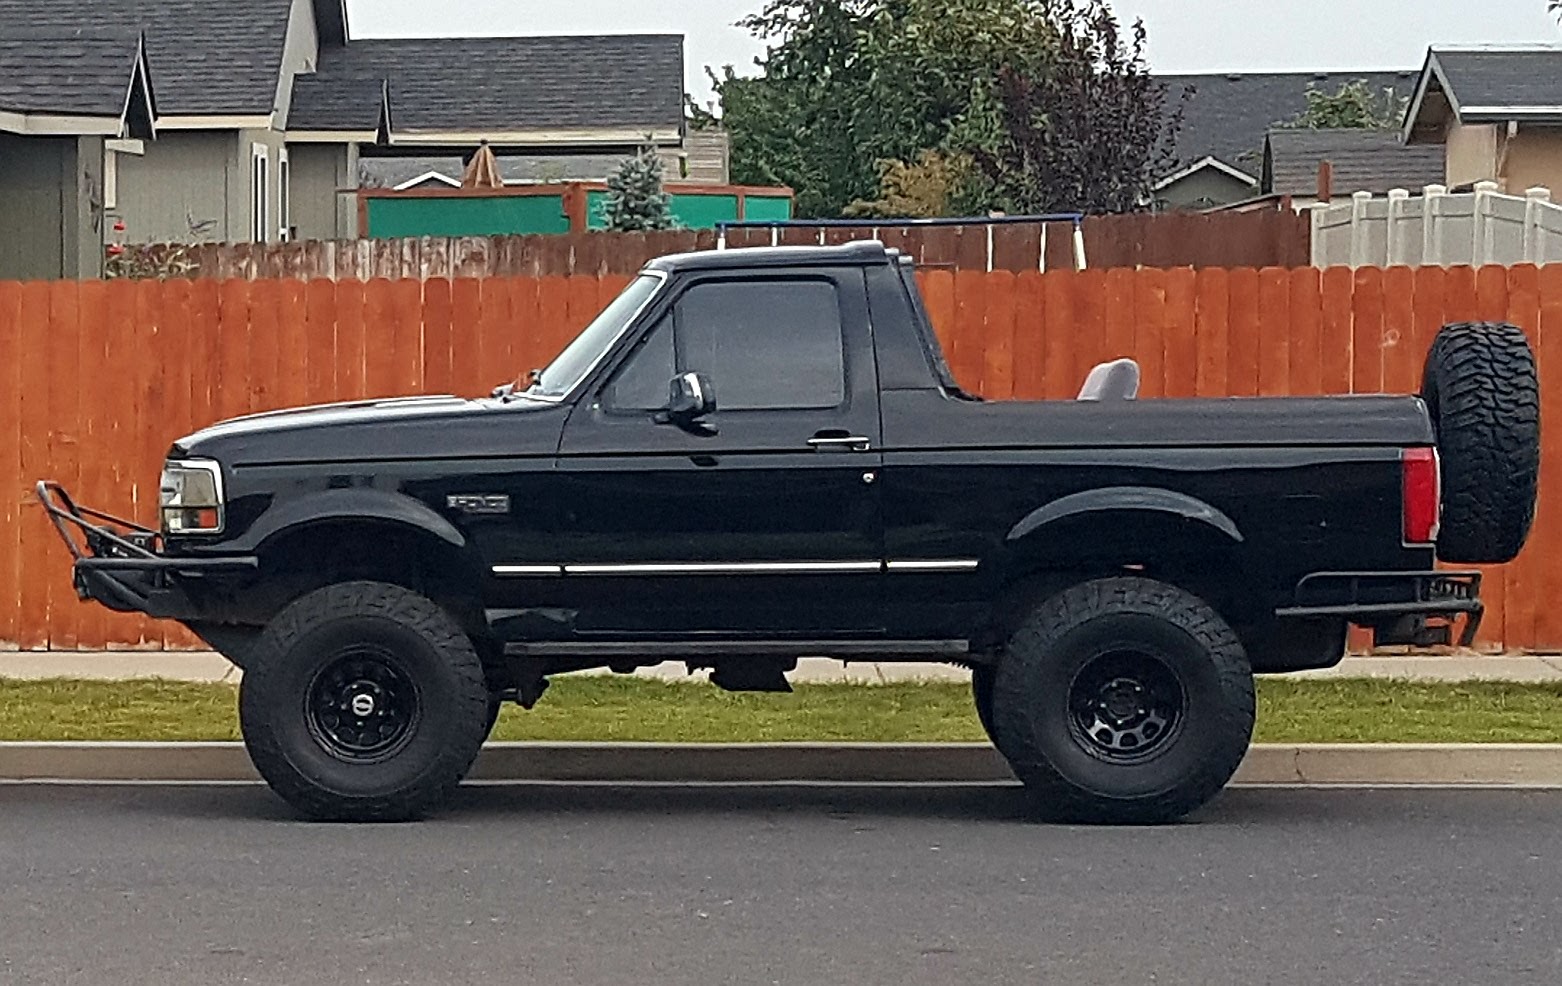 Ford Bronco Have a name / nickname for your Bronco? F5425851-C49F-4EFC-96FC-0E14DC51F6BE